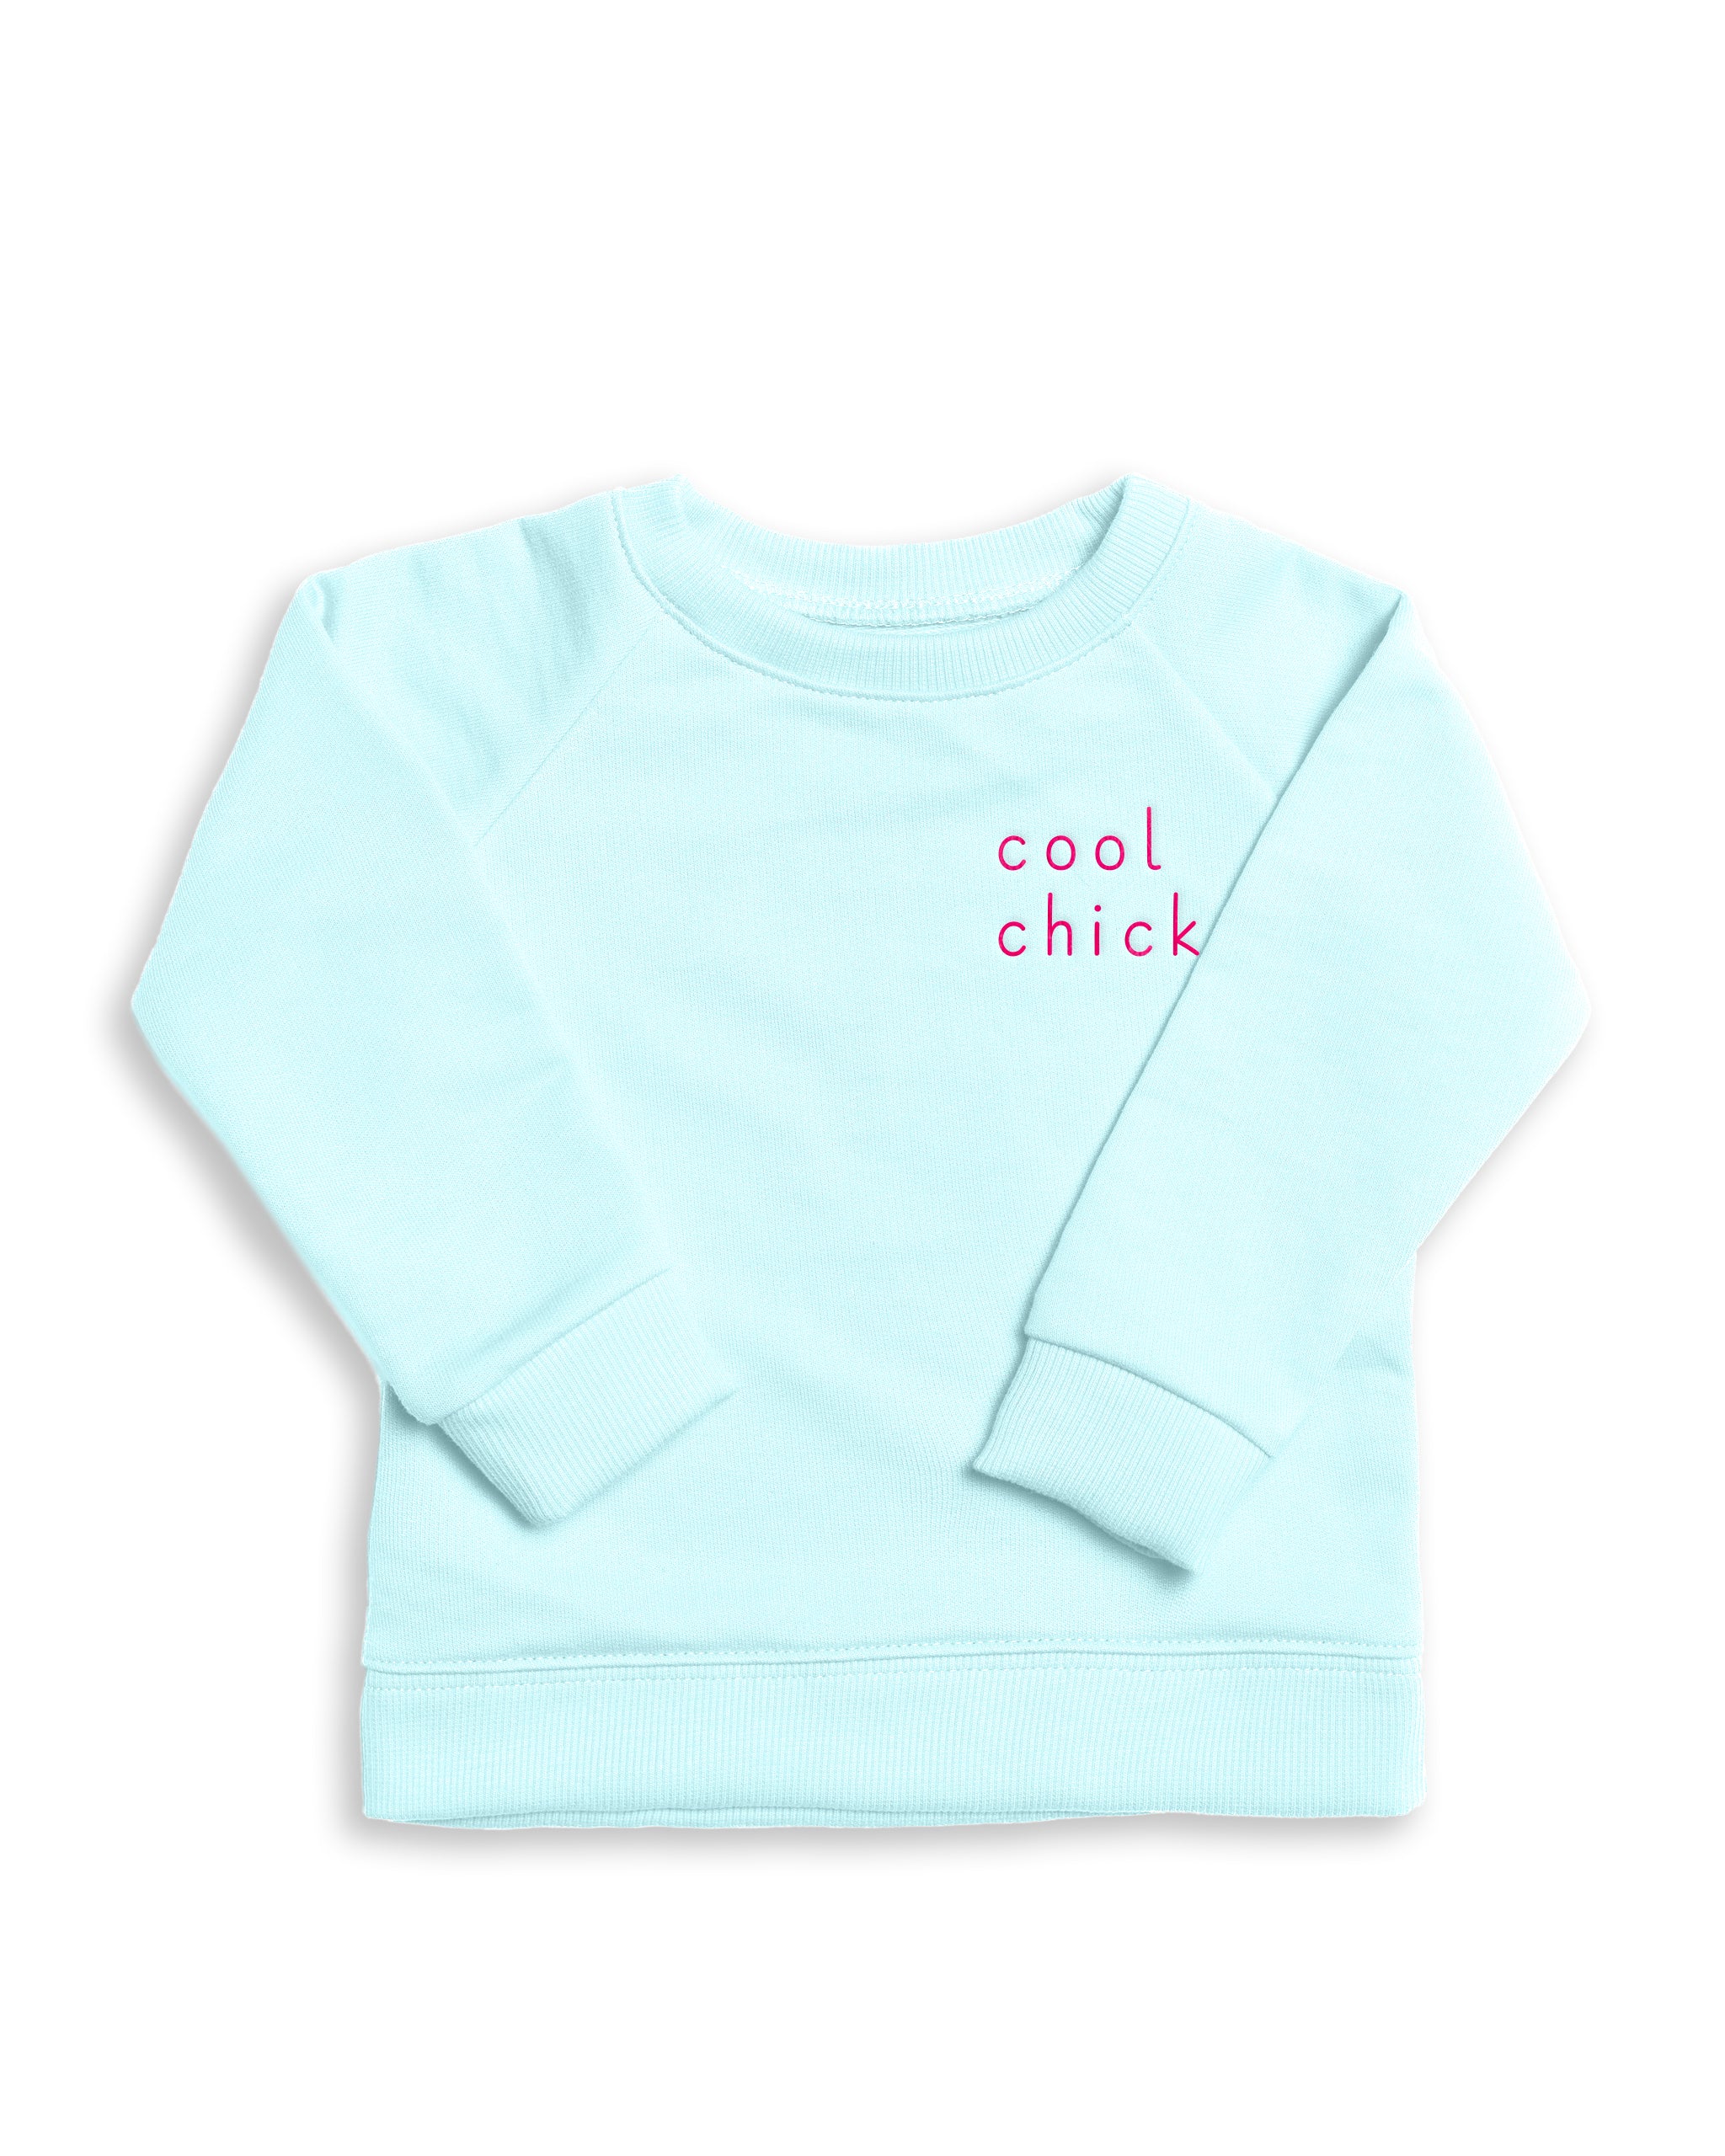 The Organic Embroidered Pullover Sweatshirt [Aqua Cool Chick]